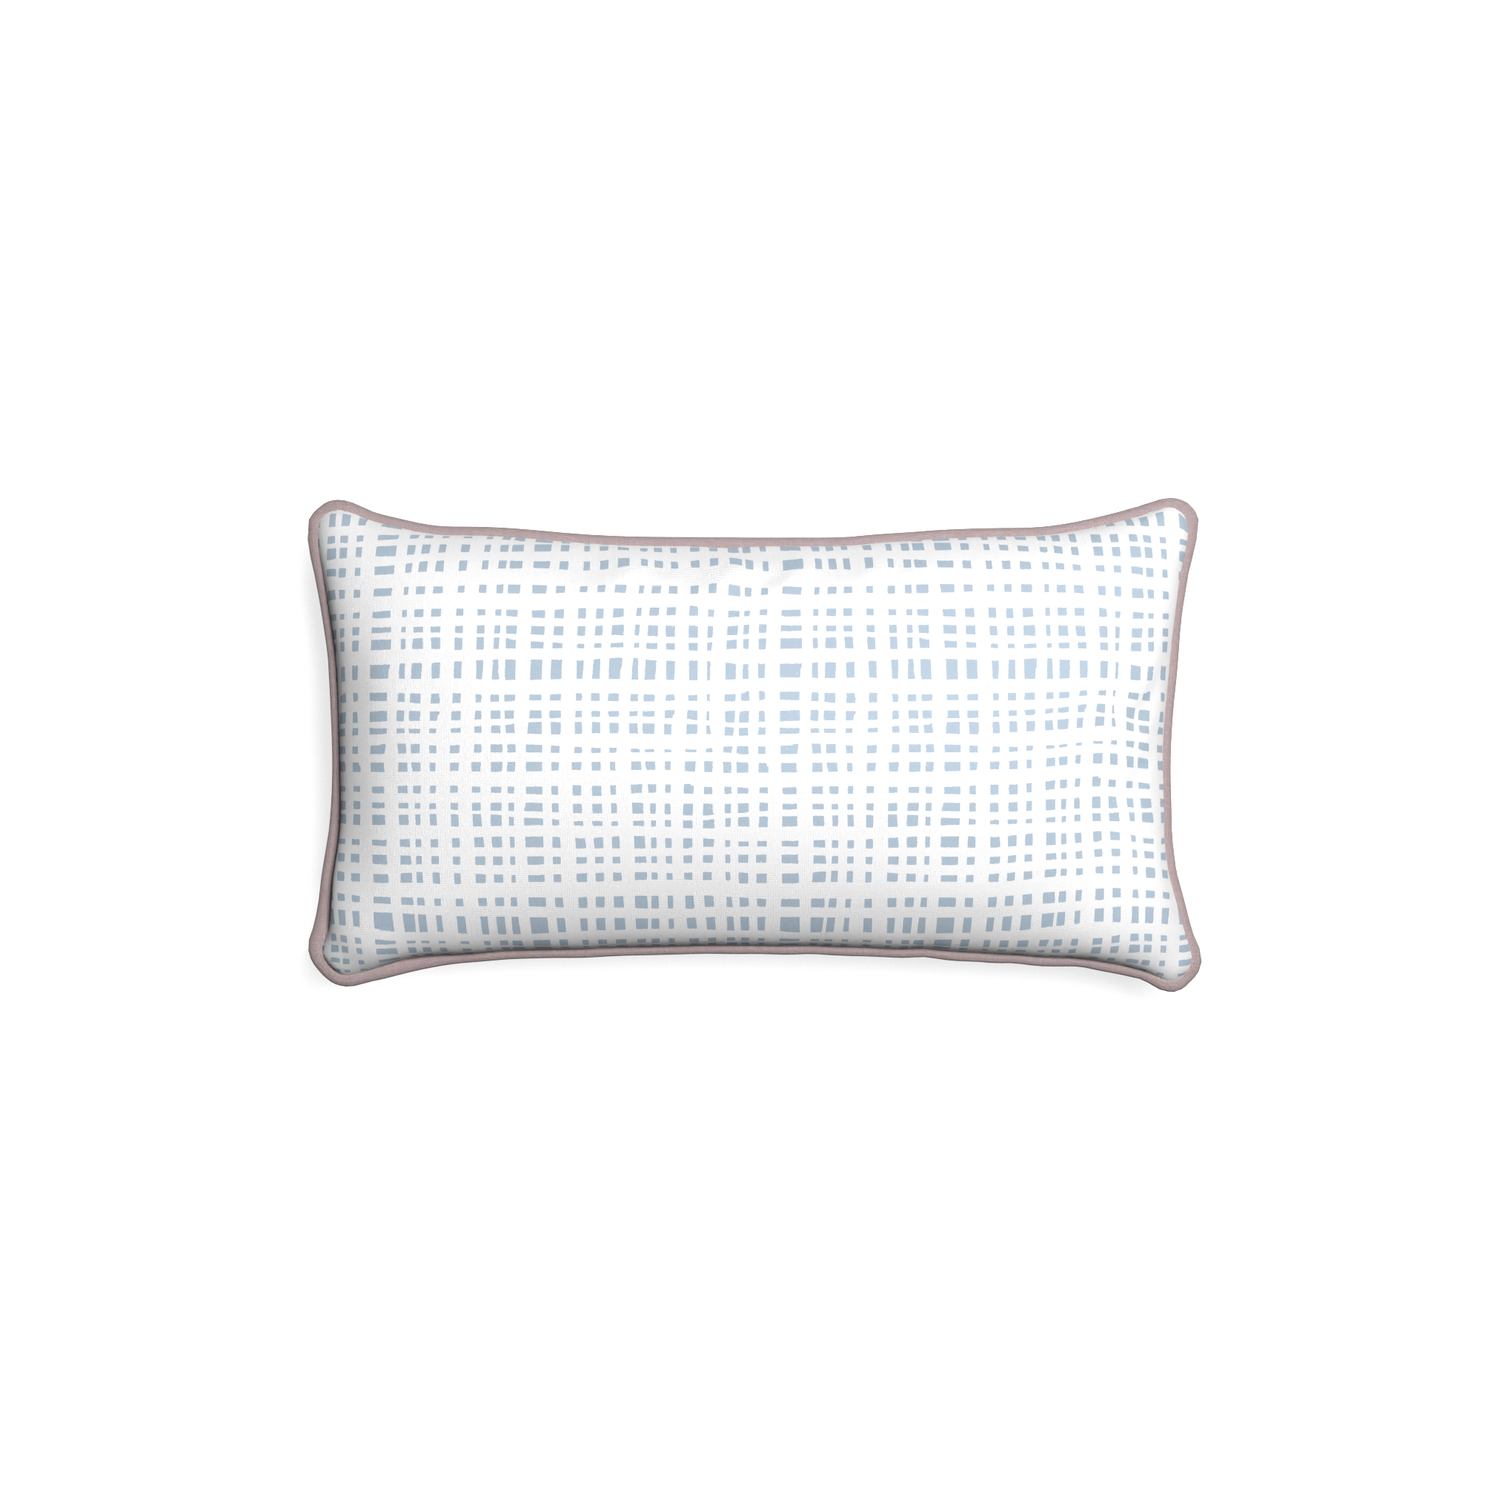 Petite-lumbar ginger custom plaid sky bluepillow with orchid piping on white background